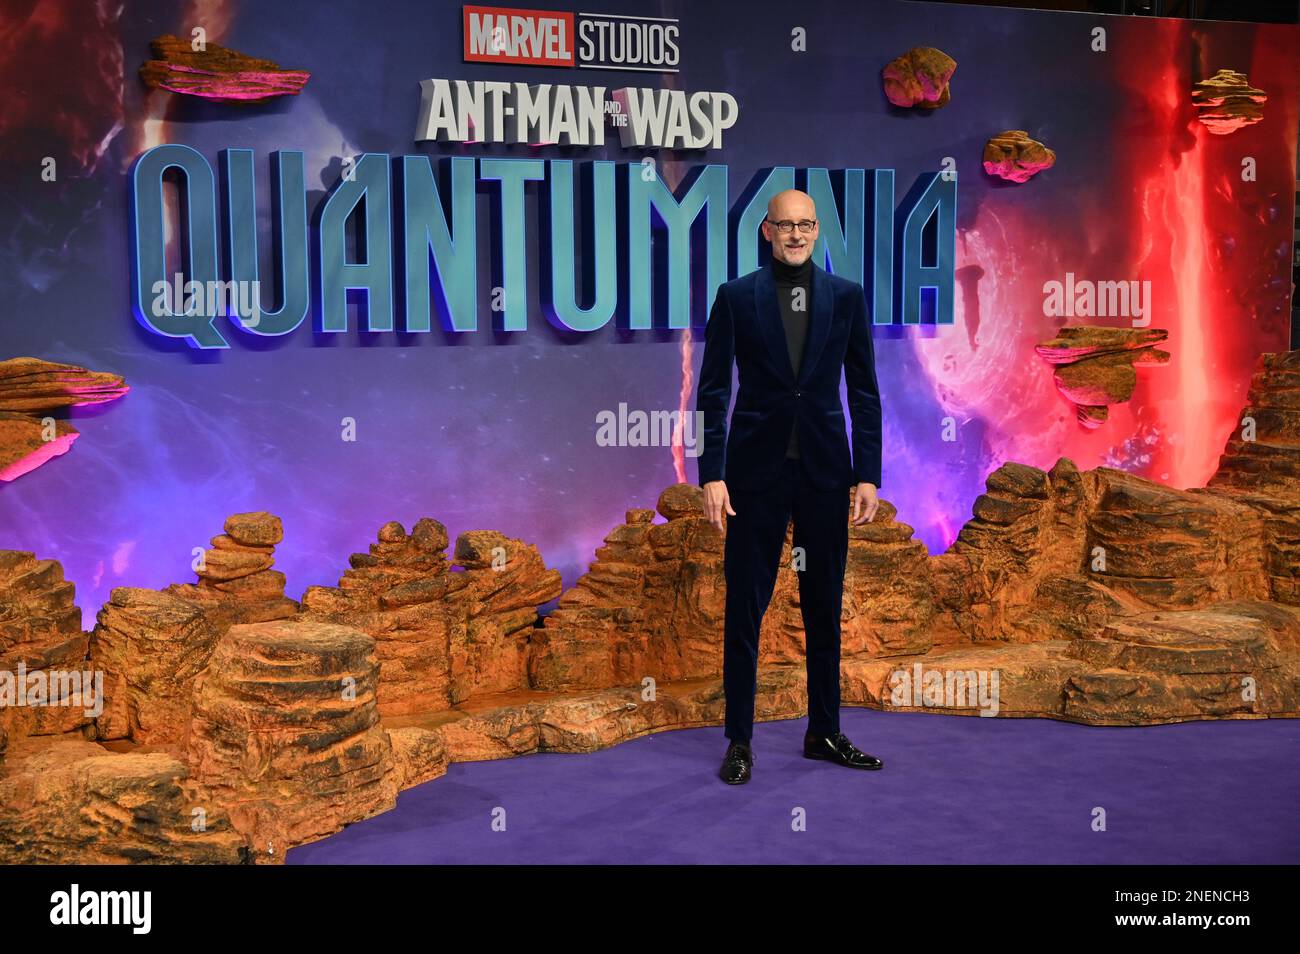 London, UK. 16th February 2023. Peyton Reed attends UK Gala Screening of Ant-Man and The Wasp: Quantumania, at BFI IMAX, Waterloo, London, UK. Photo date: 16th February 2023. Stock Photo